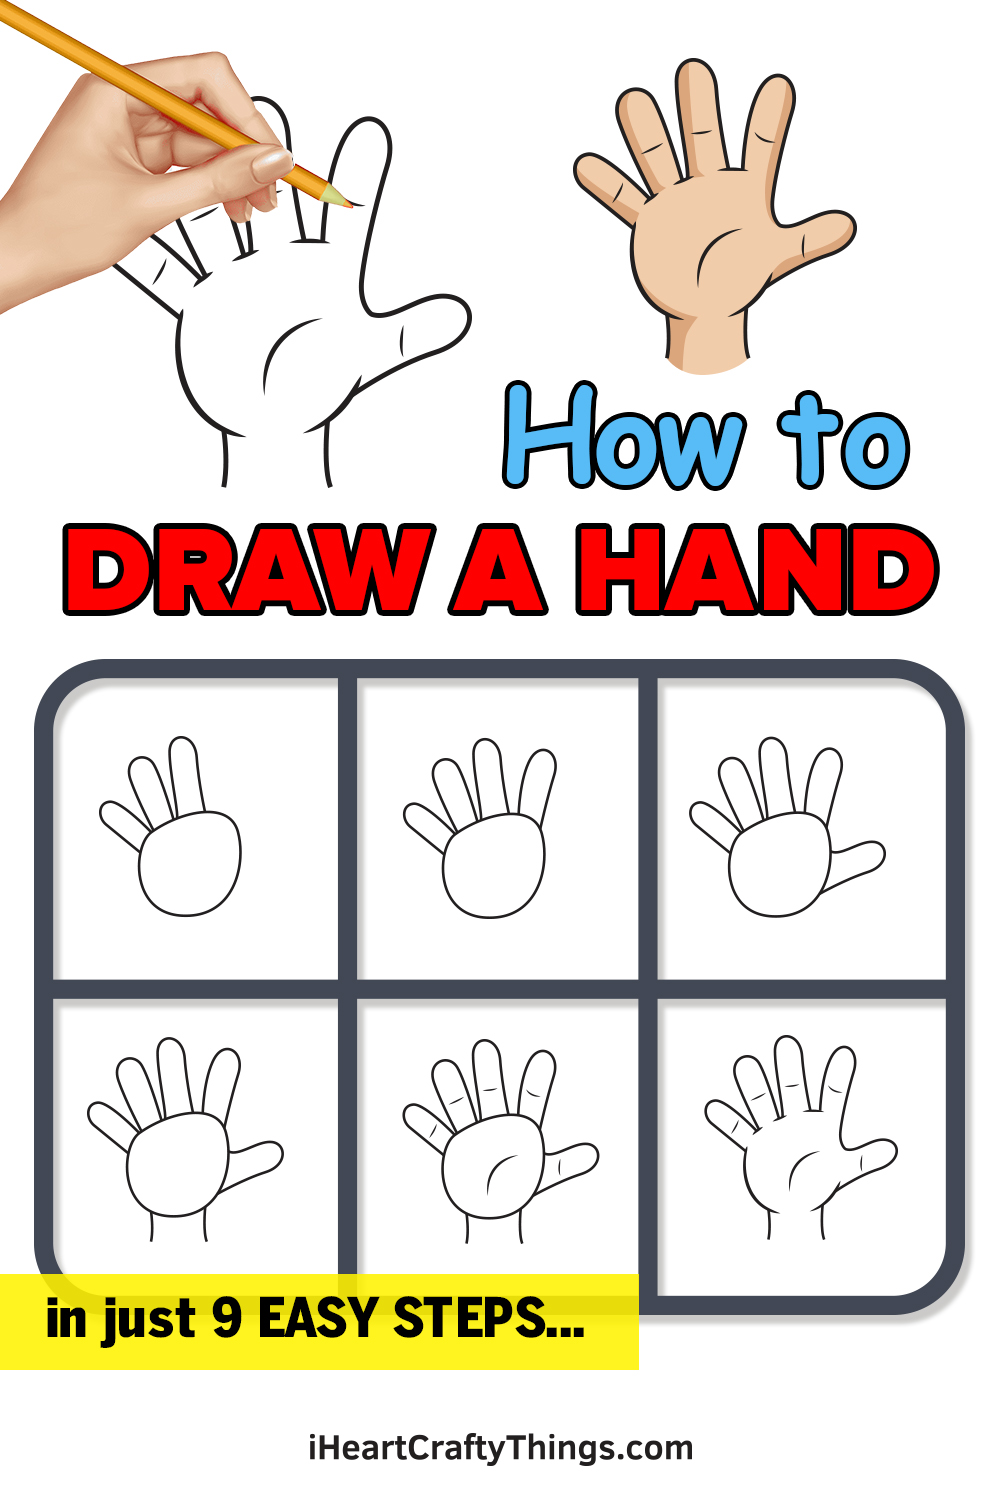 how to draw a hand in 9 easy steps